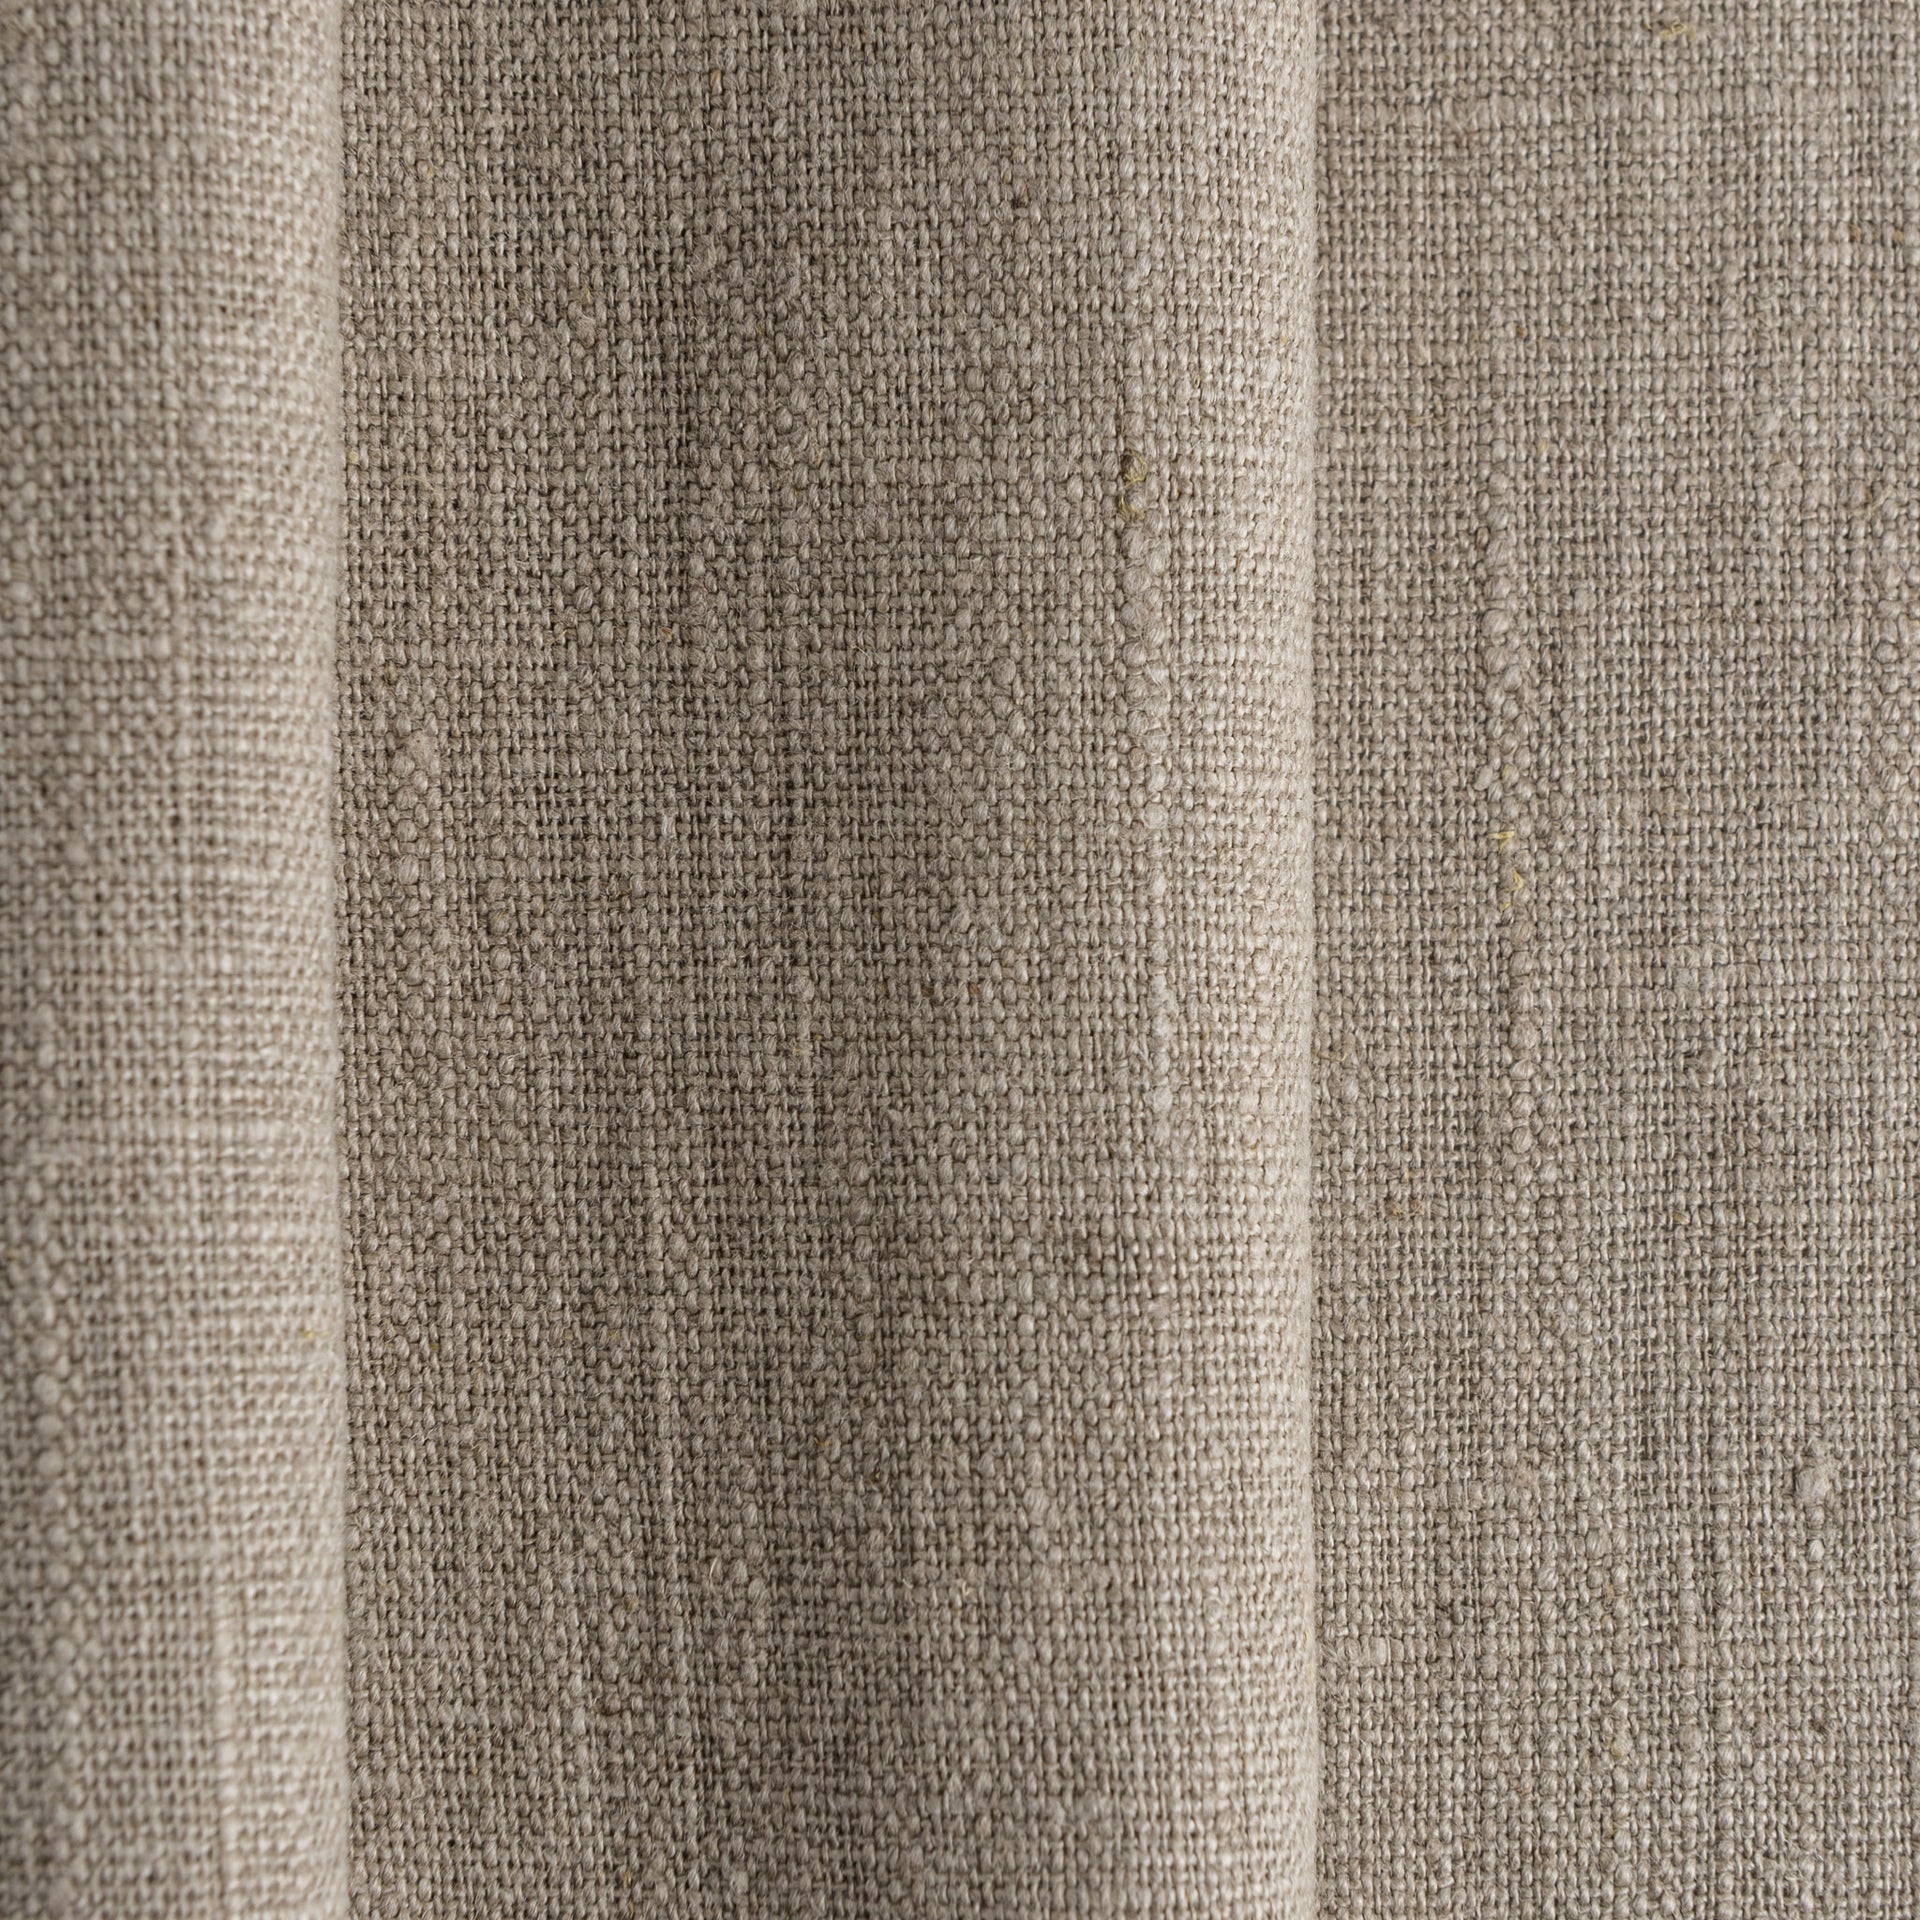 Undyed Linen Fabric, Natural Linen Fabric by the Meter or Yard,  Heavyweight, Softened Linen Fabric for Sewing, 100 Percent Linen Fabric. -   Canada